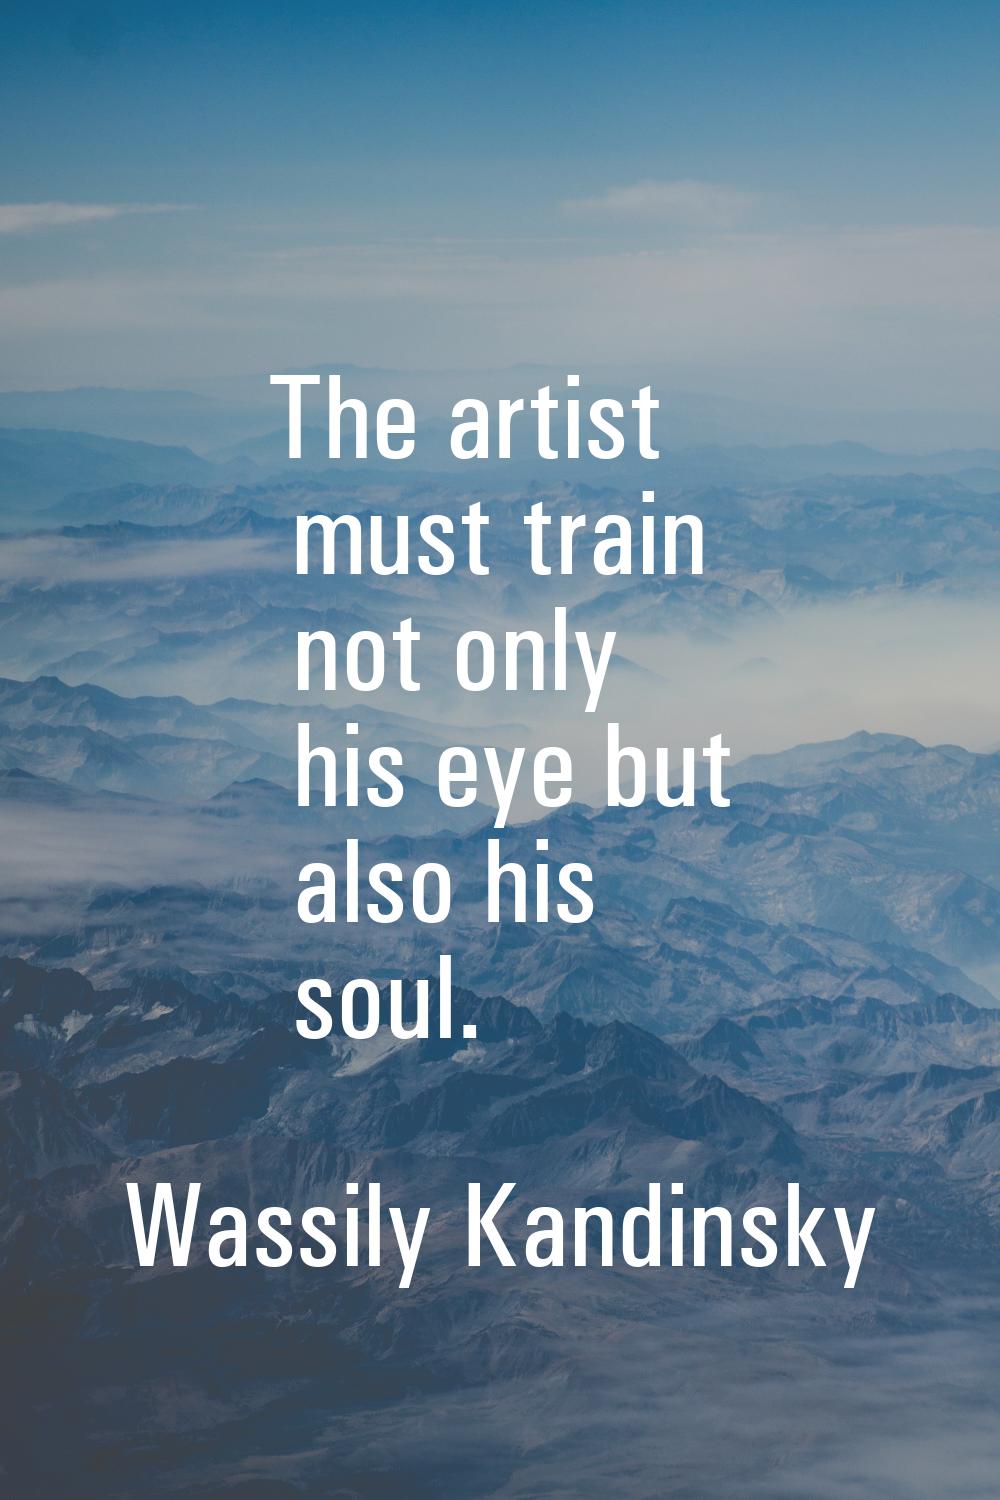 The artist must train not only his eye but also his soul.